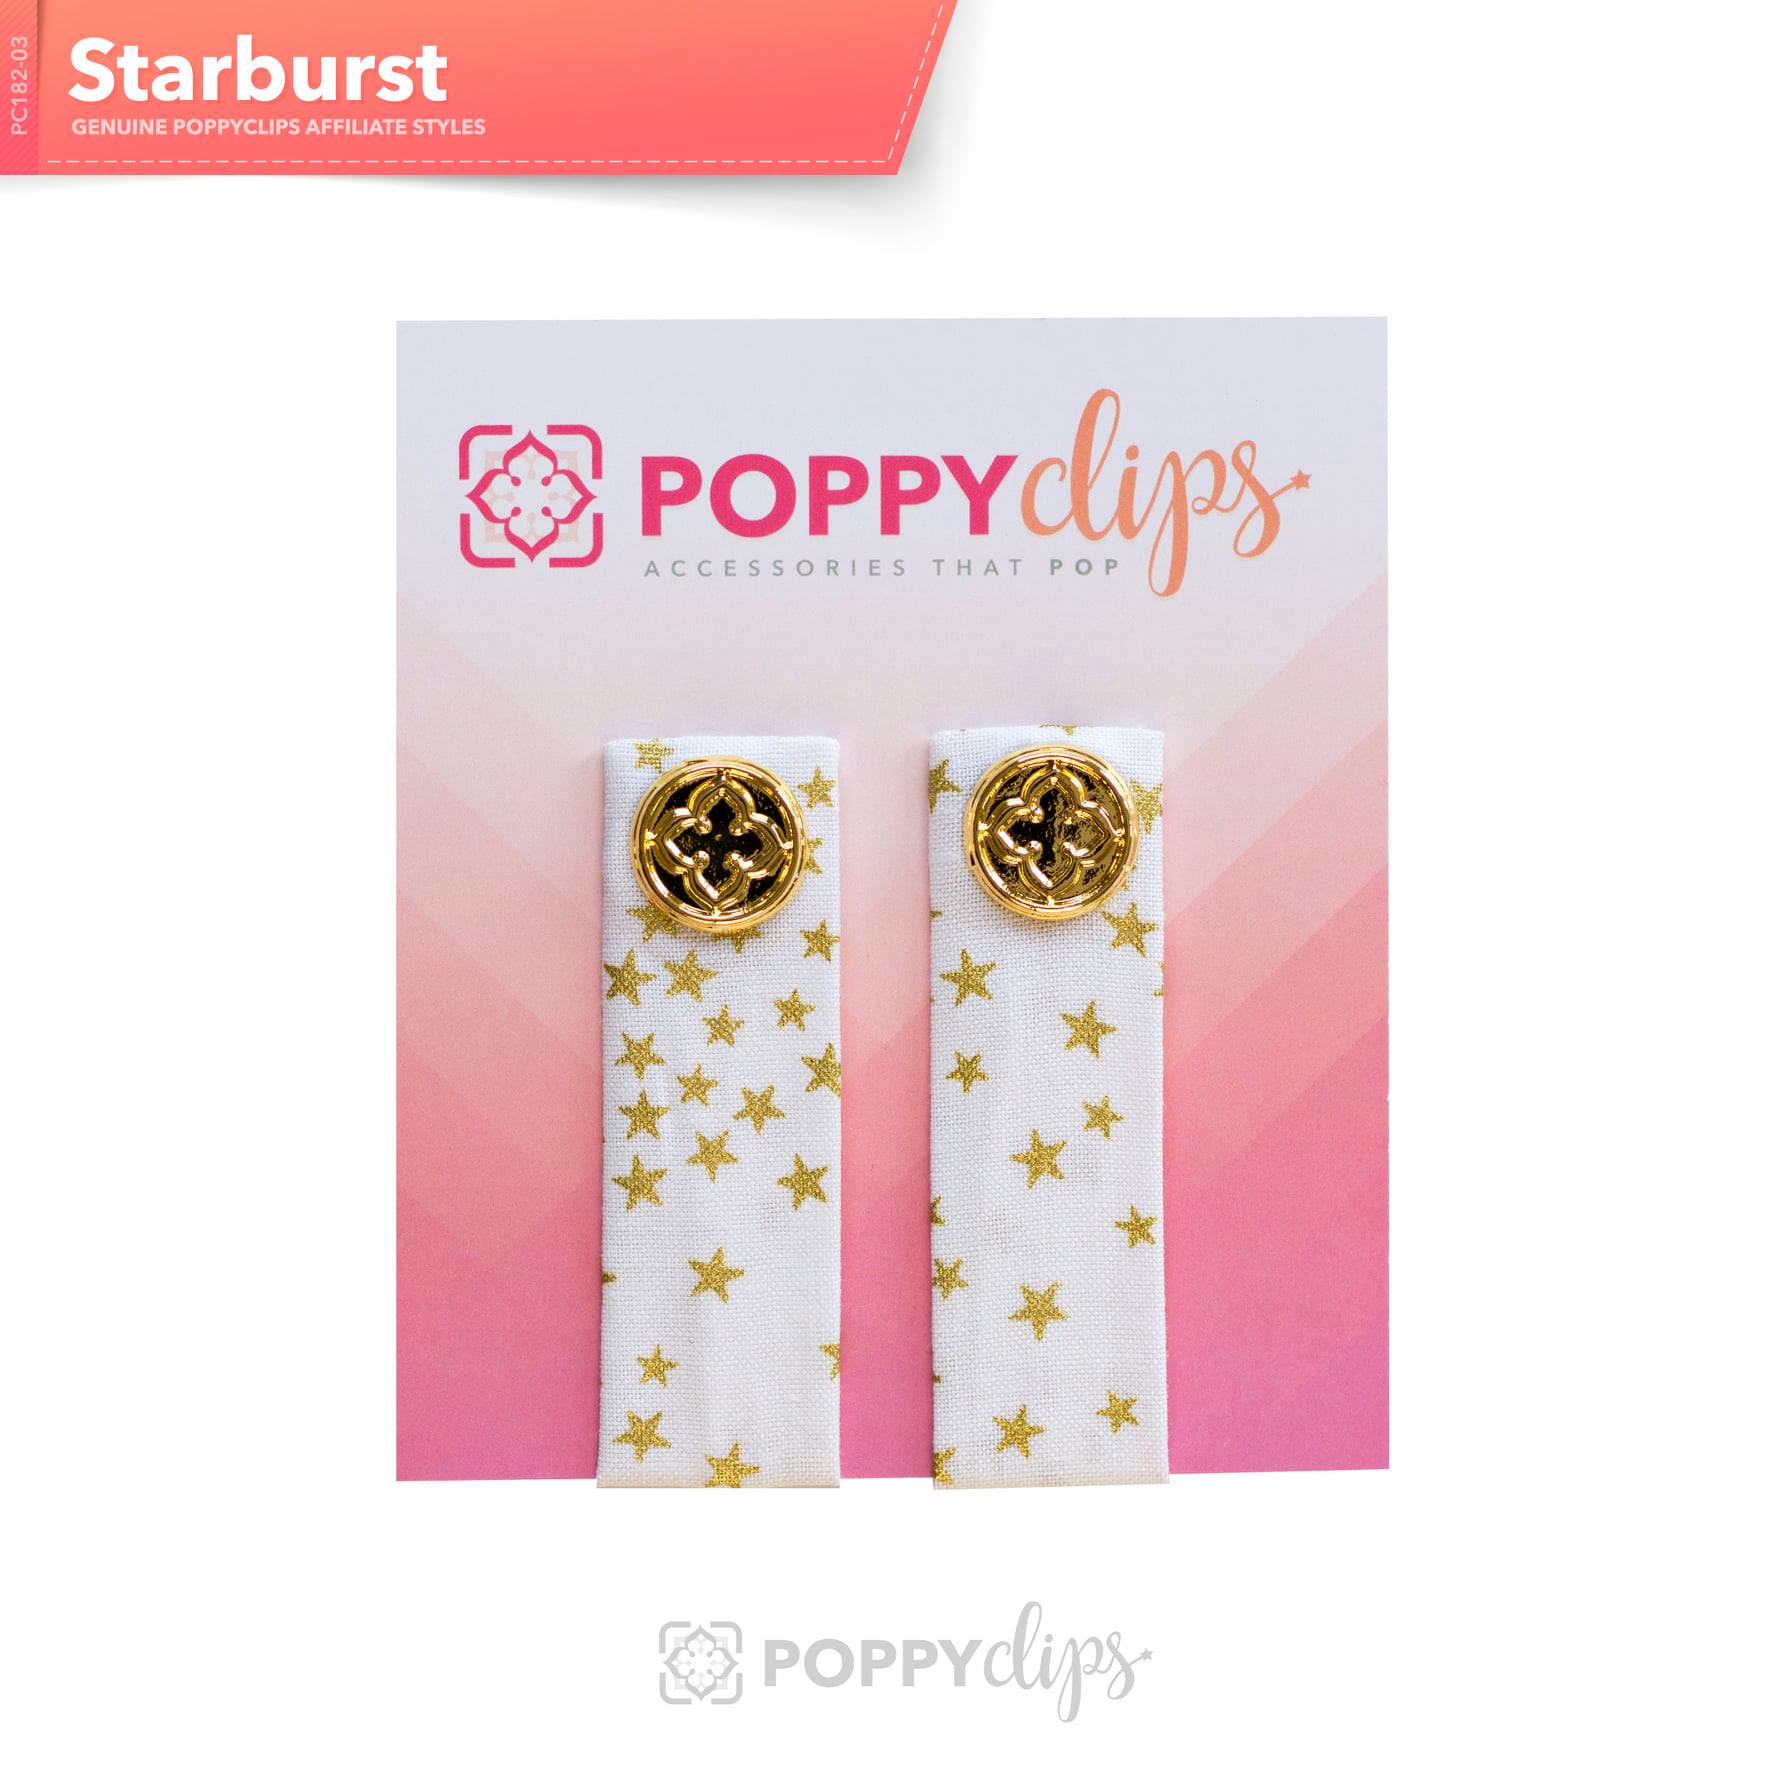 Two 5 ¼” long by 7/8” wide white material with tiny stars in a random pattern, and a magnet at each end.  The outer magnet is a decorative gold medallion with the company logo. 